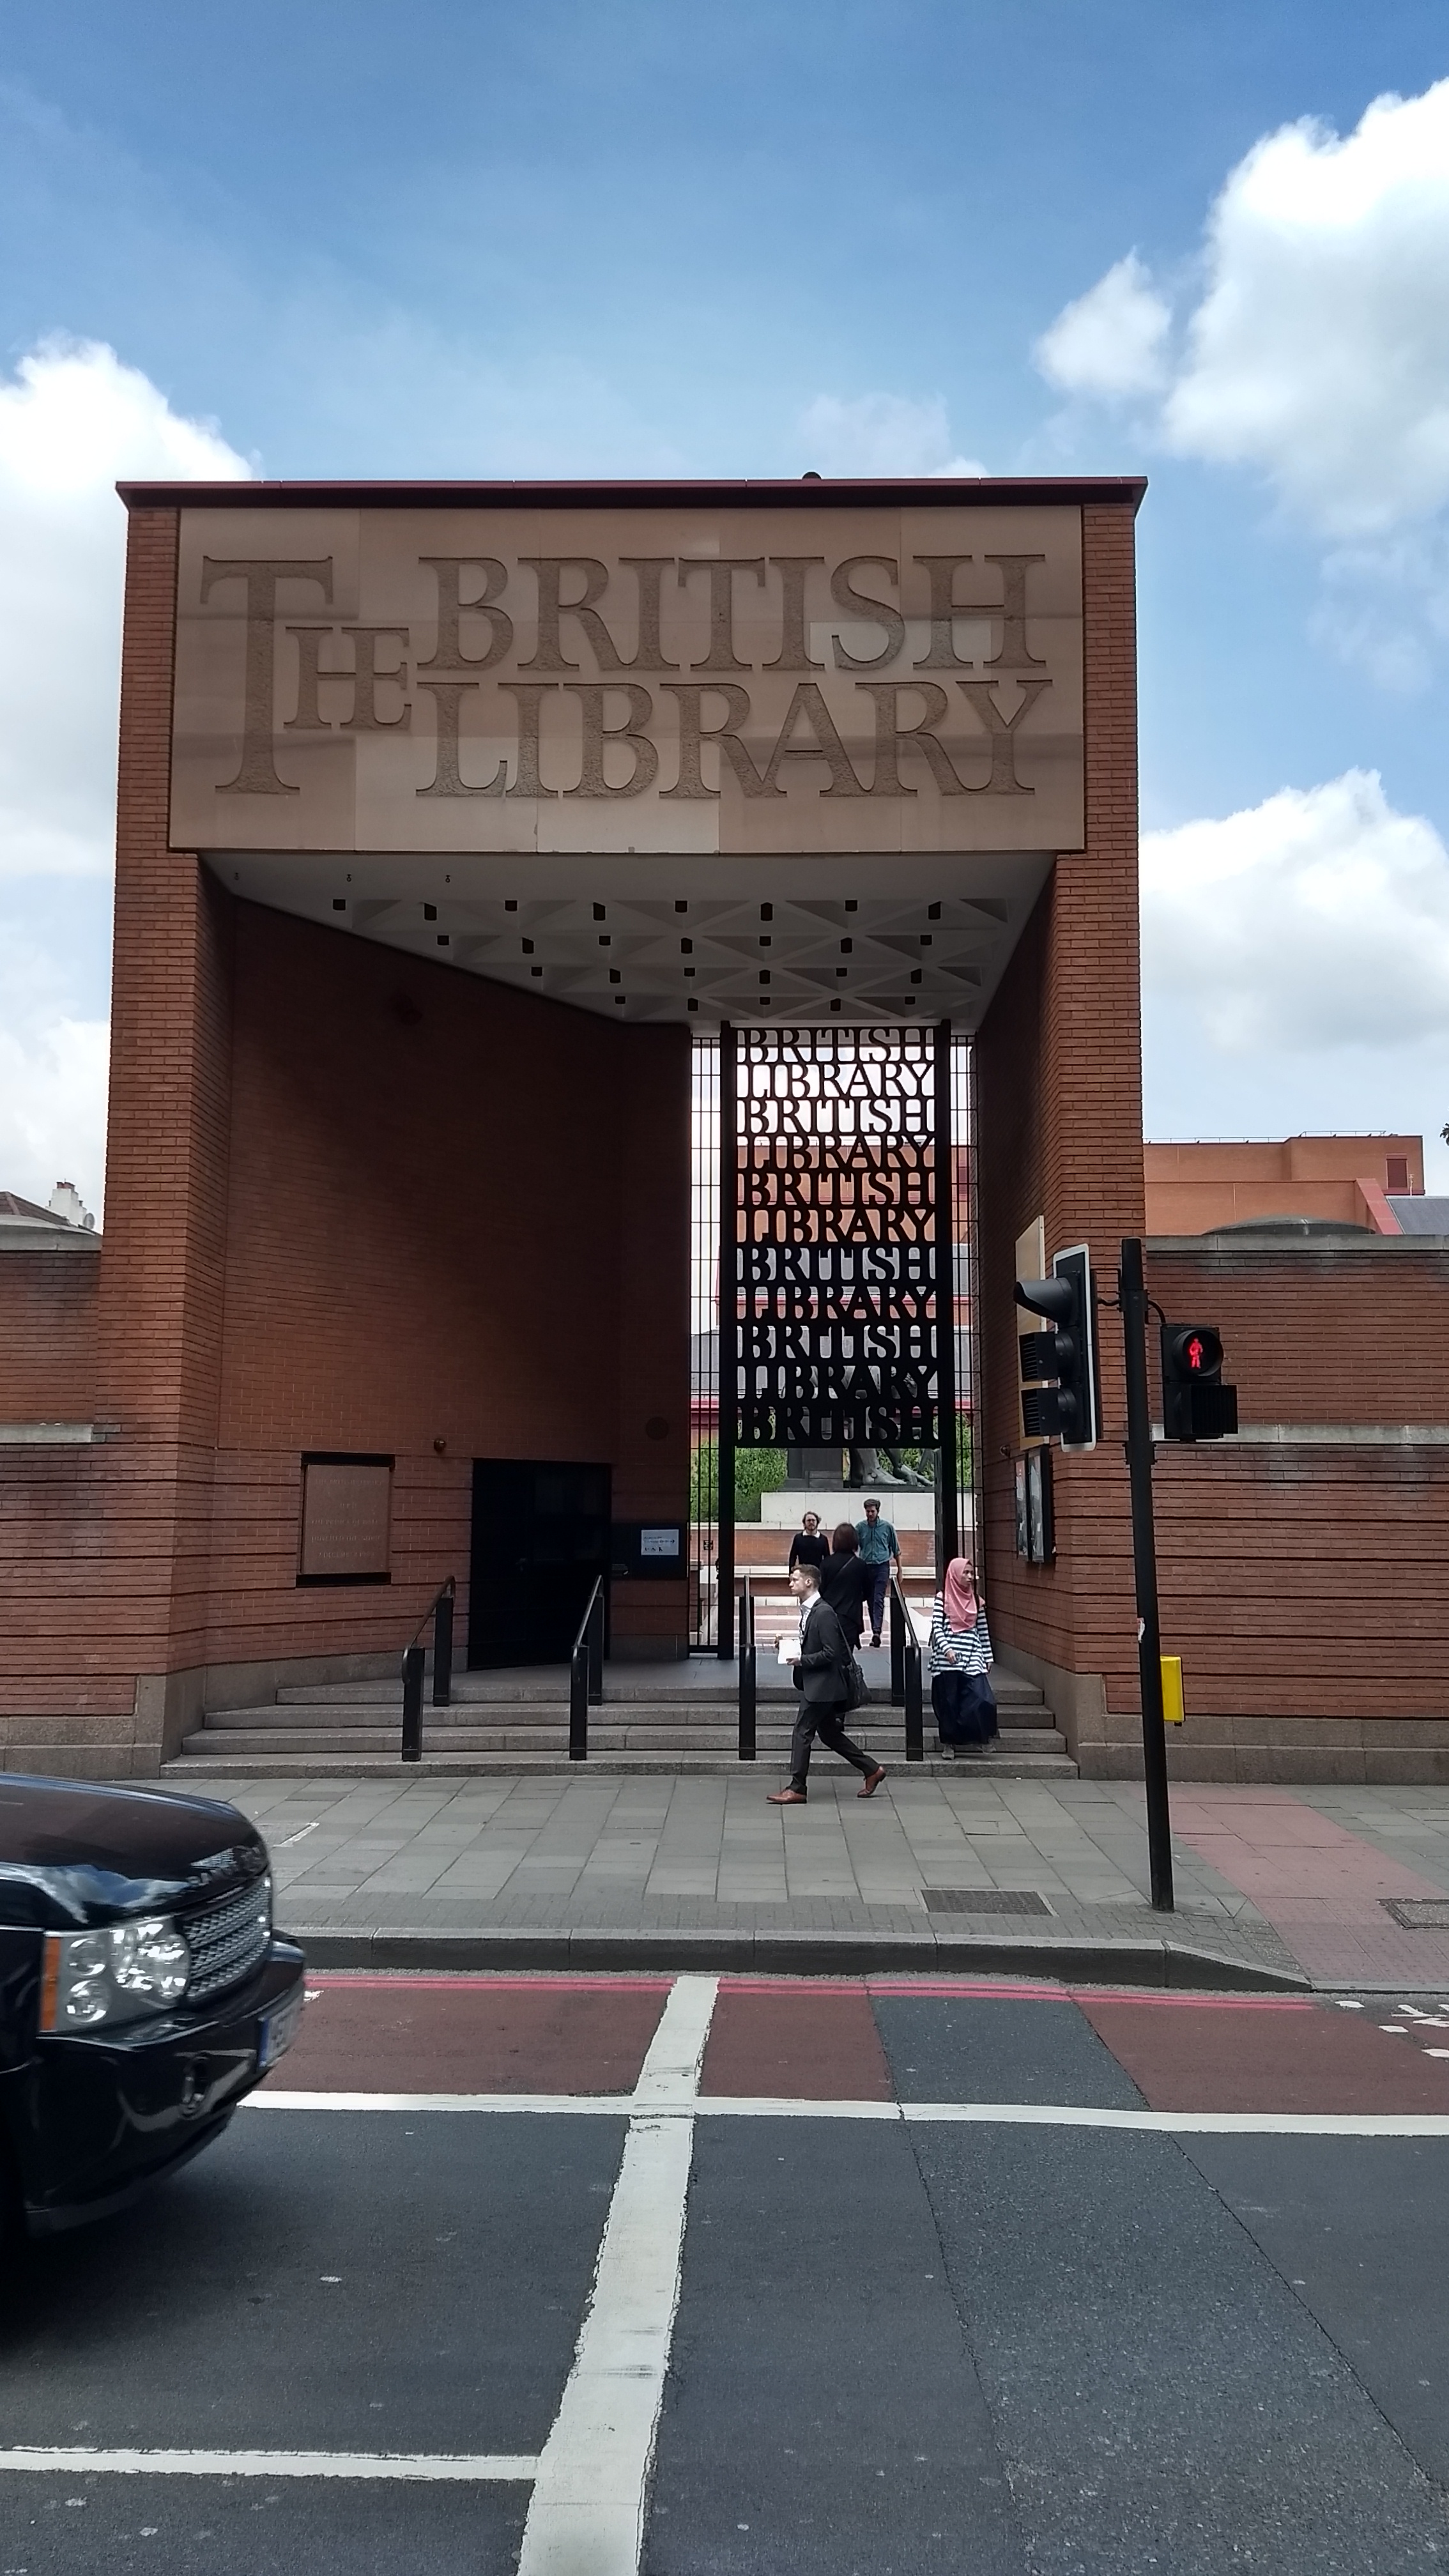 The front gate of the British Library